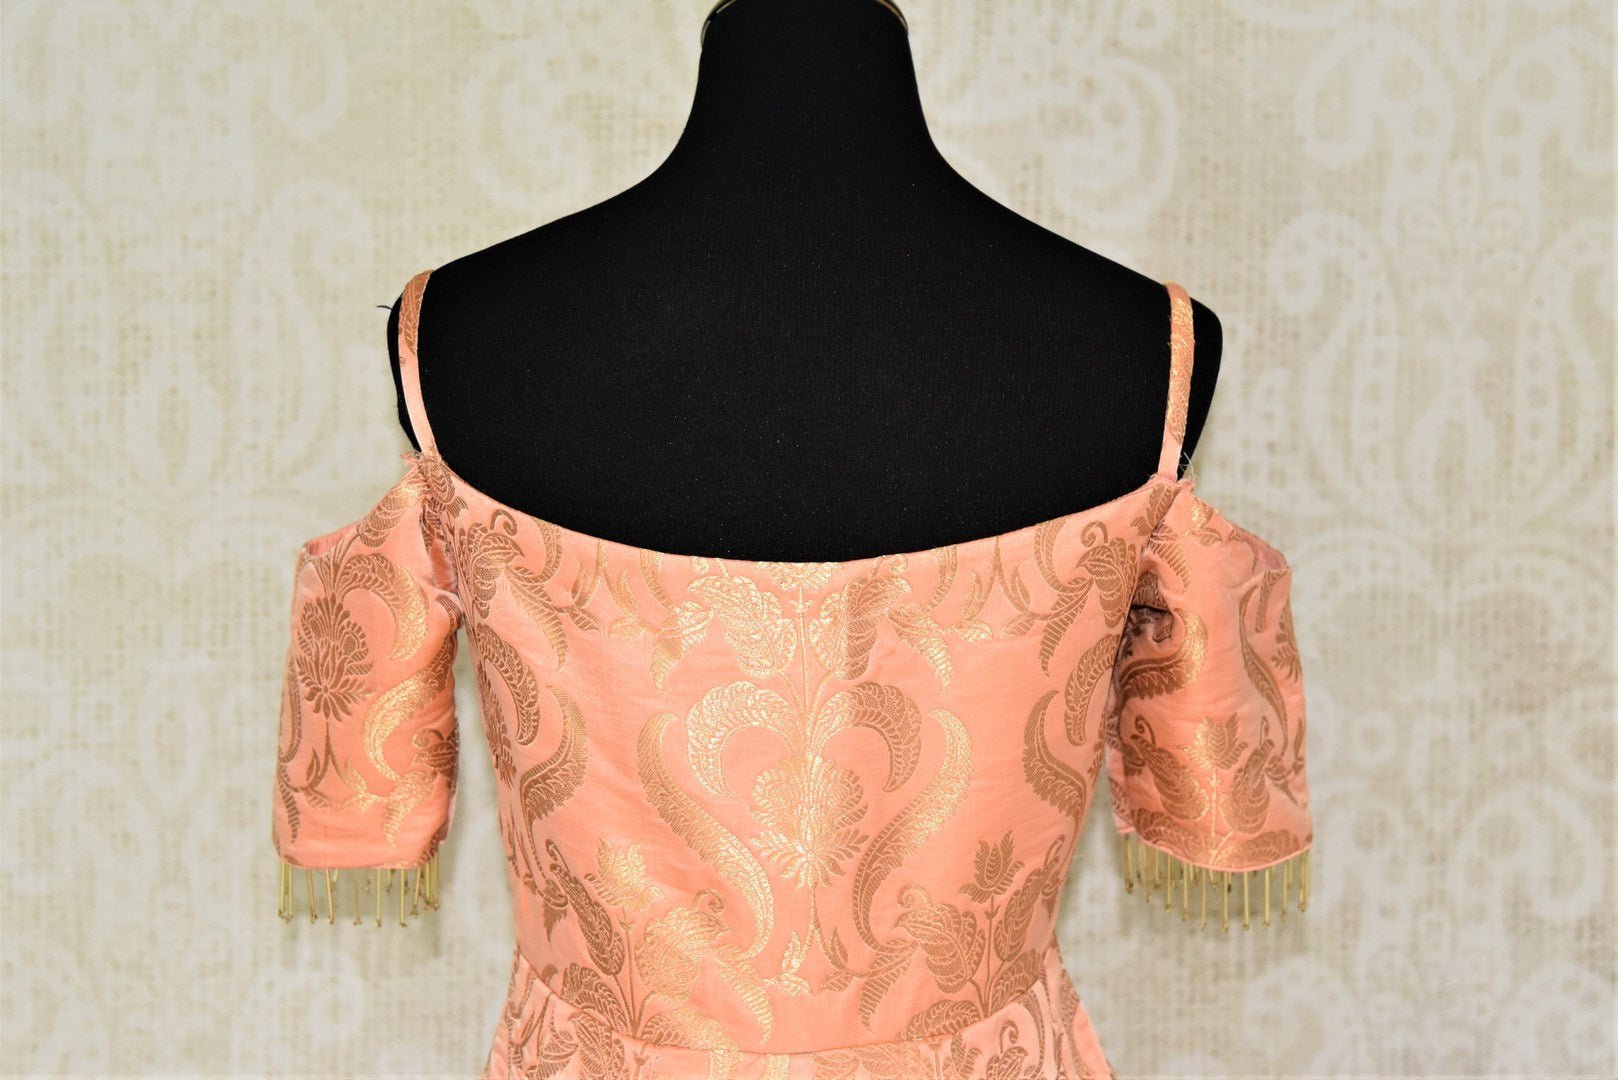 Buy beautiful peach Banarasi silk designer gown online in USA. Add brilliance to your Indian look with alluring Indian designer wedding dresses available at Pure Elegance Indian clothing store for women in USA or shop online.-back